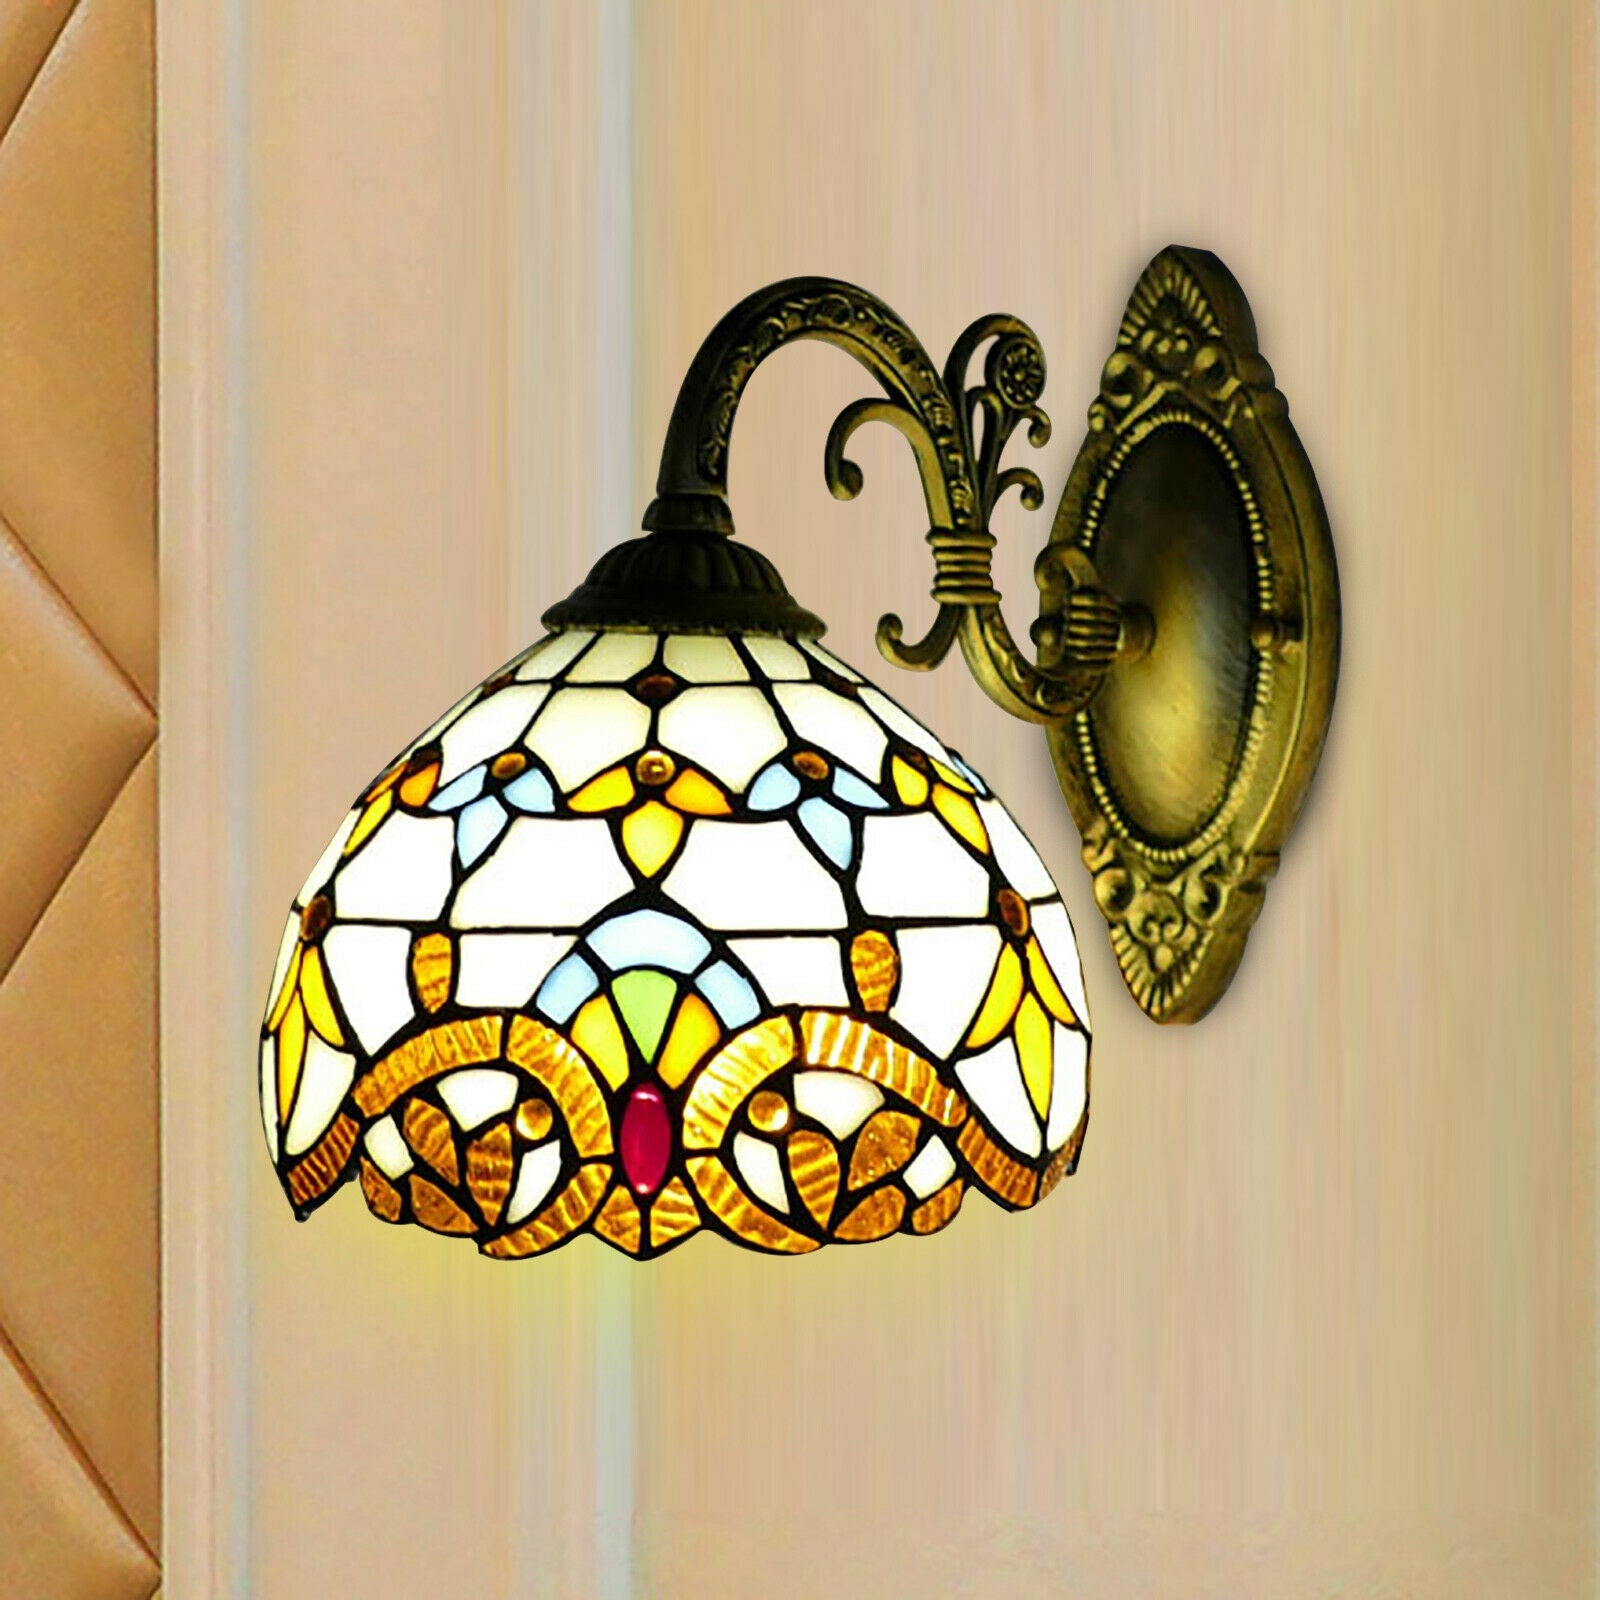 TFCFL  Style Glazed Wall Sconce Stained Glass Shade Wall Lamp Decor Art Fixture